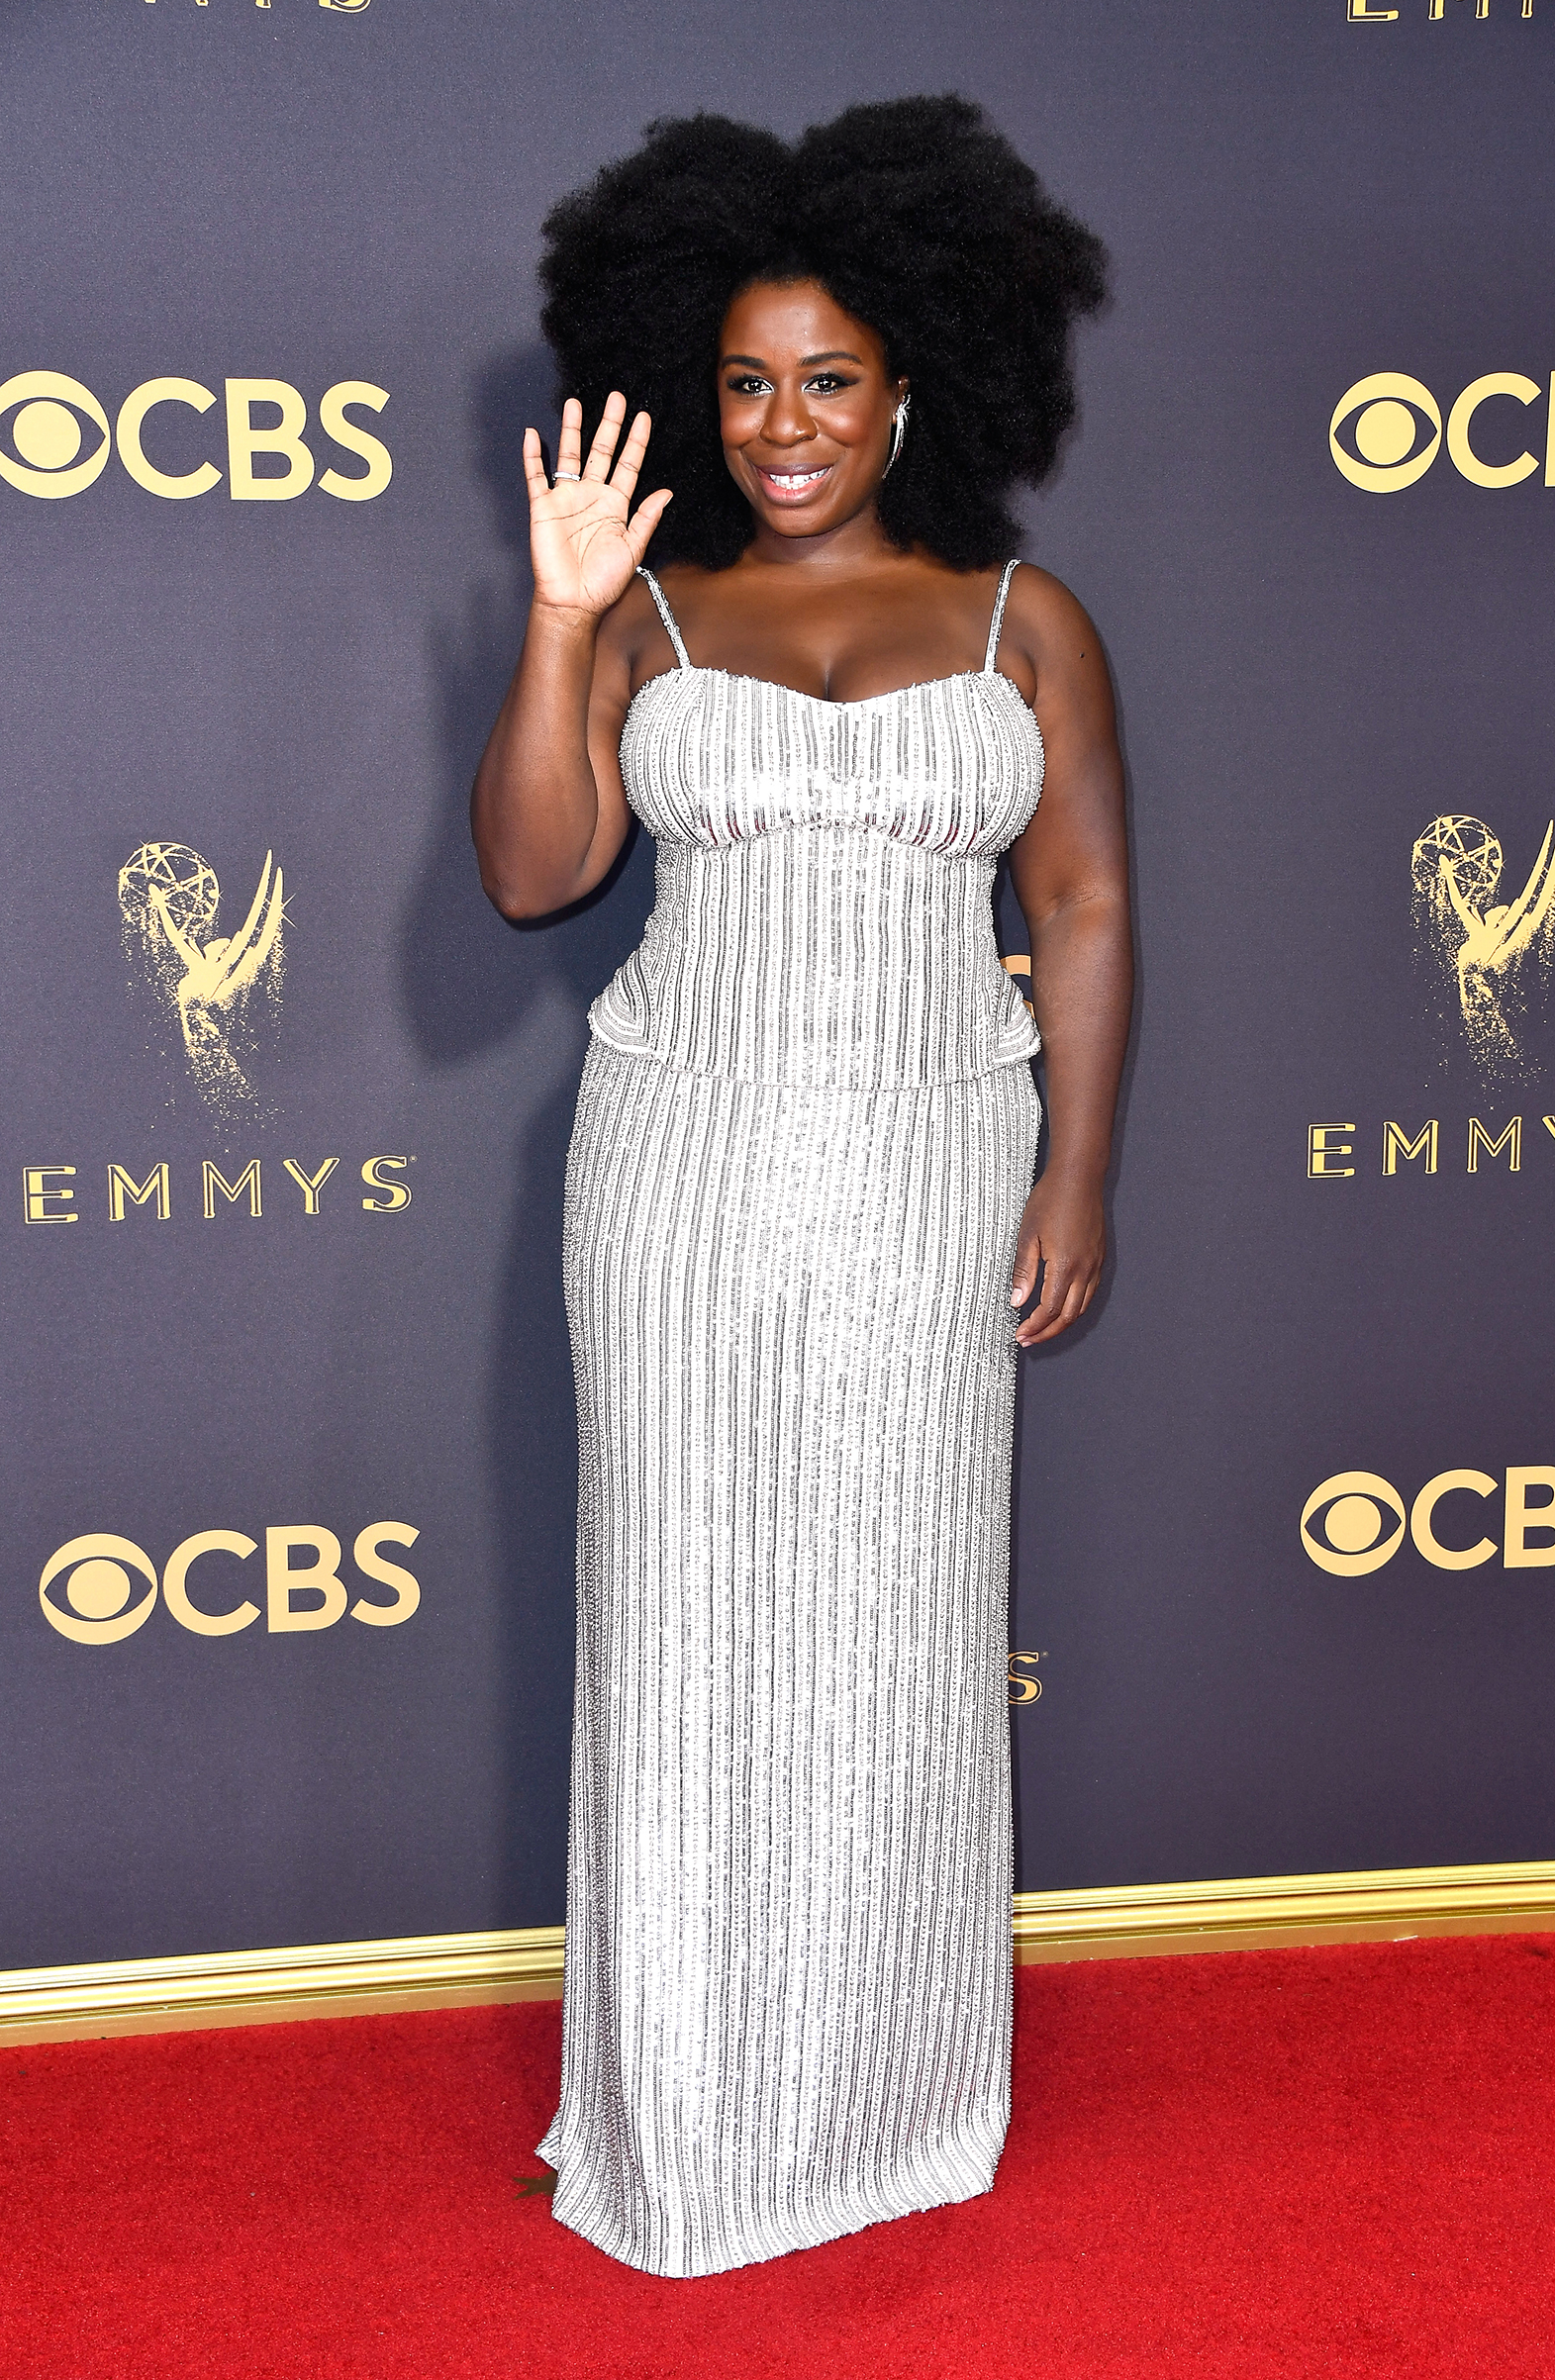 Actor Uzo Aduba attends the 69th Annual Primetime Emmy Awards at Microsoft Theater on September 17, 2017 in Los Angeles, California.